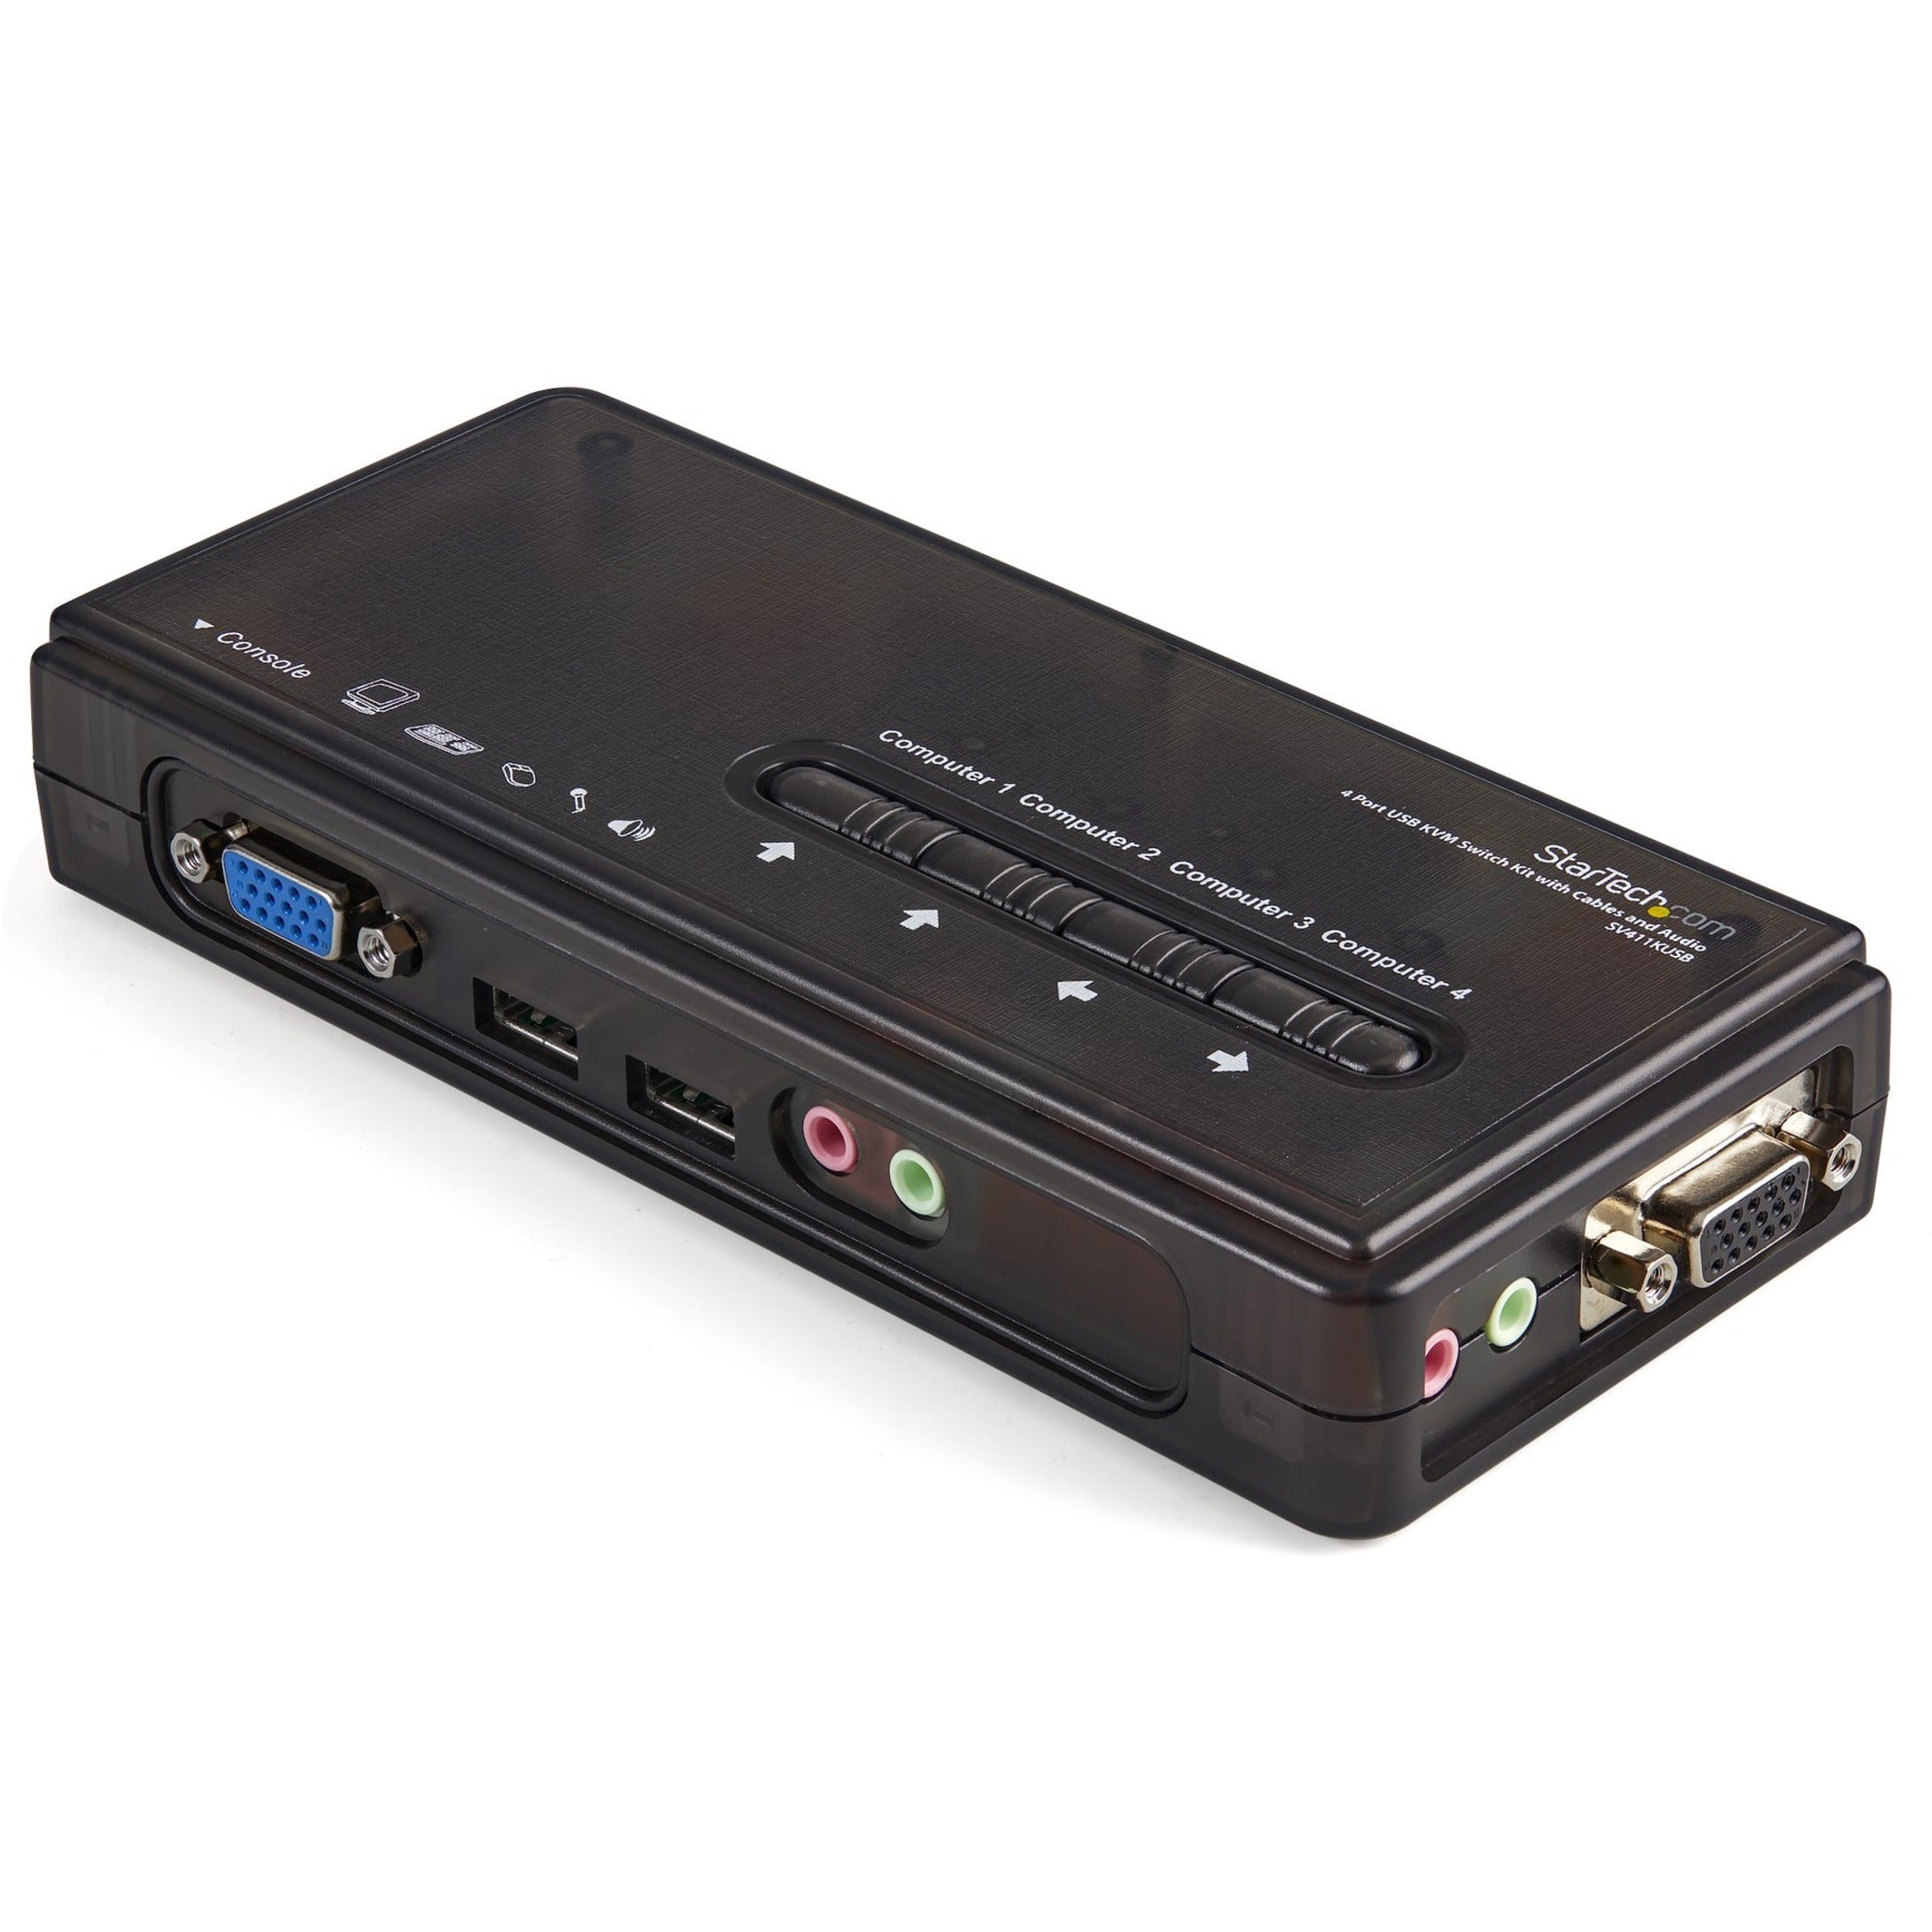 StarTech.com SV411KUSB 4P MINI USB KVM Switch with Cable and Audio Switching